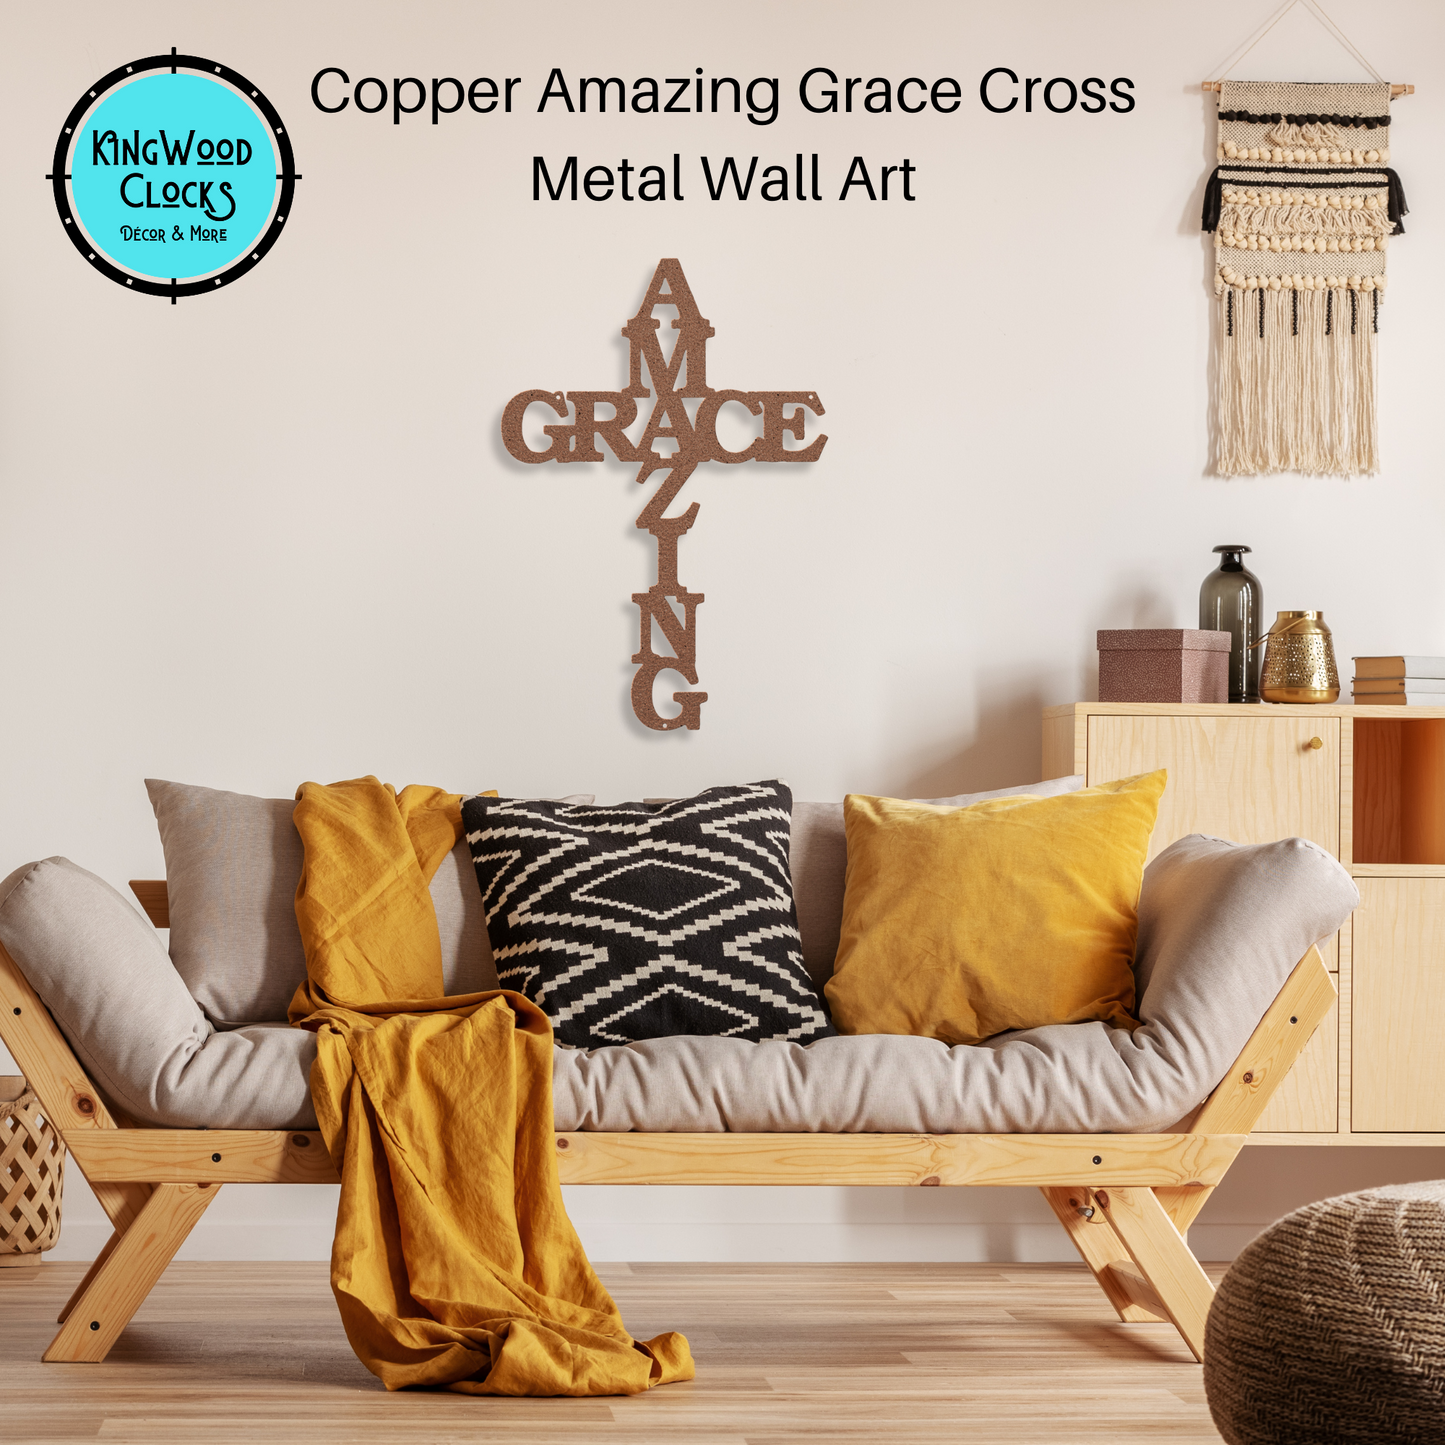 Amazing Grace Cross Metal Wall Art copper in living room over couch